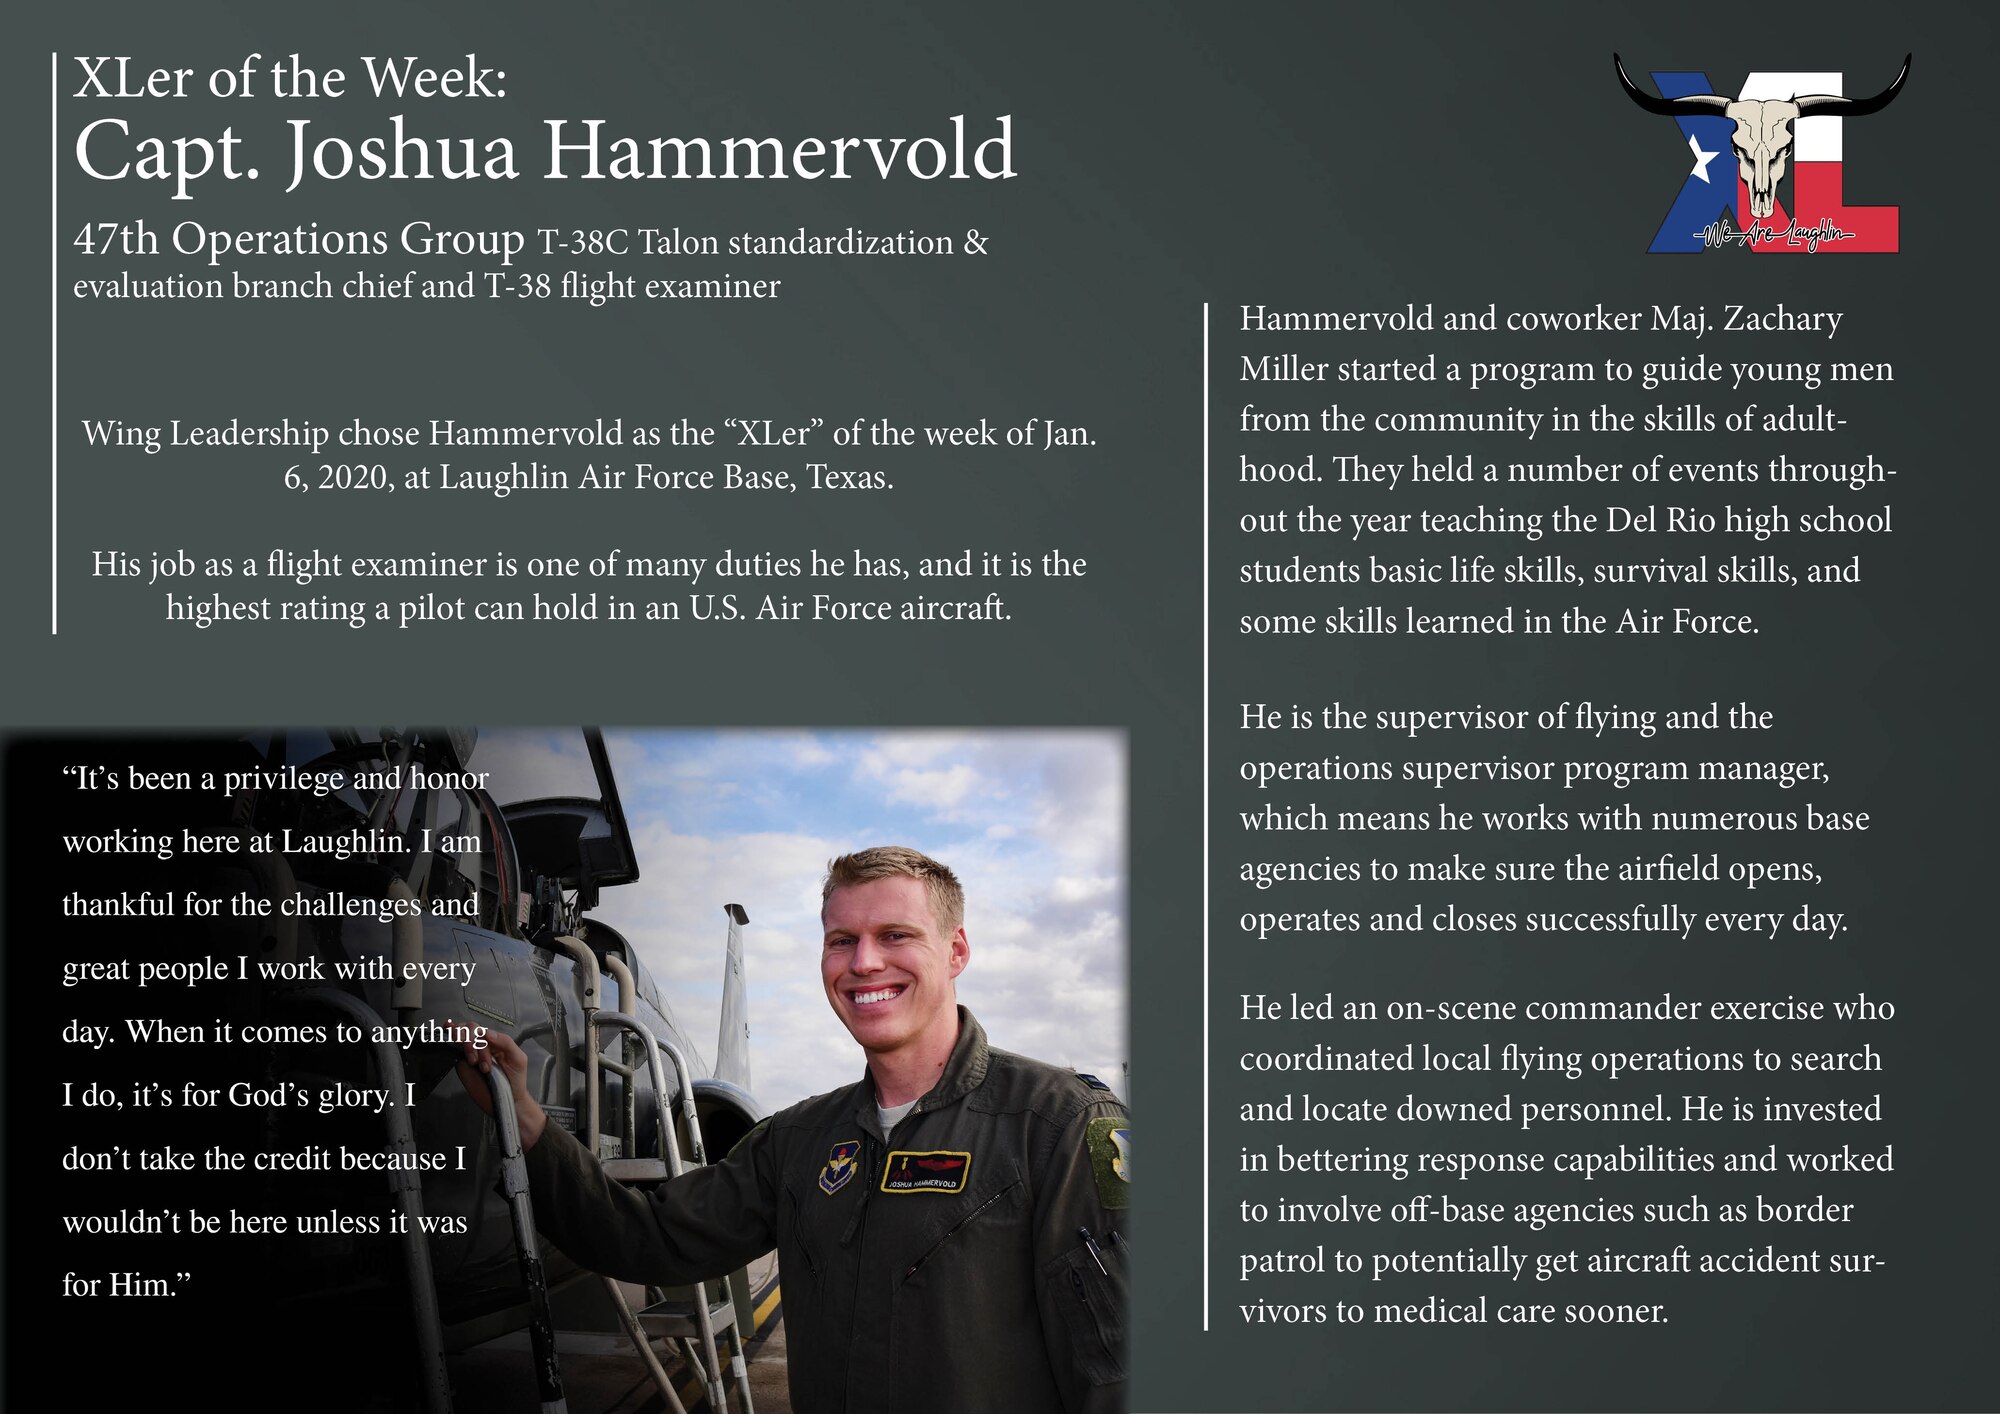 Capt. Joshua Hammervold, 47th Operations Group T-38C Talon standardization and evaluation, was chosen by wing leadership to be the “XLer of the Week”, Jan. 6, 2019, at Laughlin Air Force Base, Texas. The “XLer” award, presented by Col. Lee Gentile, 47th Flying Training Wing commander, and Chief Master Sgt. Brian Lewis, 47th Operations Group superintendent, is given to those who consistently make outstanding contributions to their unit and the Laughlin mission. (U.S. Air Force Graphic by Senior Airman Anne McCready)